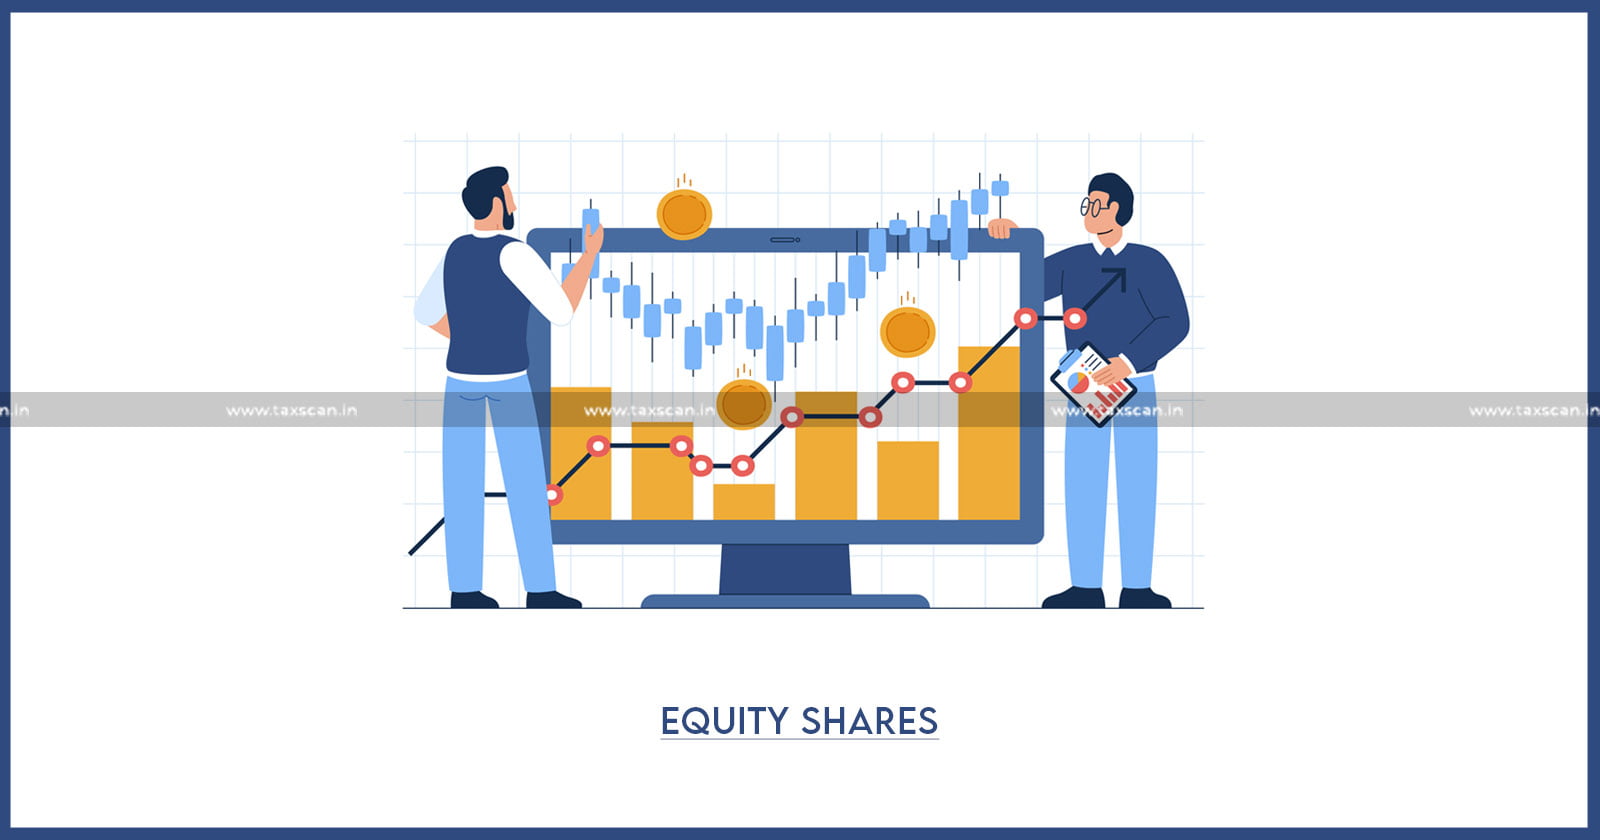 Valuation Report of Equity Shares prepared by Accountant is not Sacrosanct - Valuation Report of Equity Shares - Equity Shares - Valuation Report - Accountant - ITAT upholds Revision Order - ITAT - Taxscan